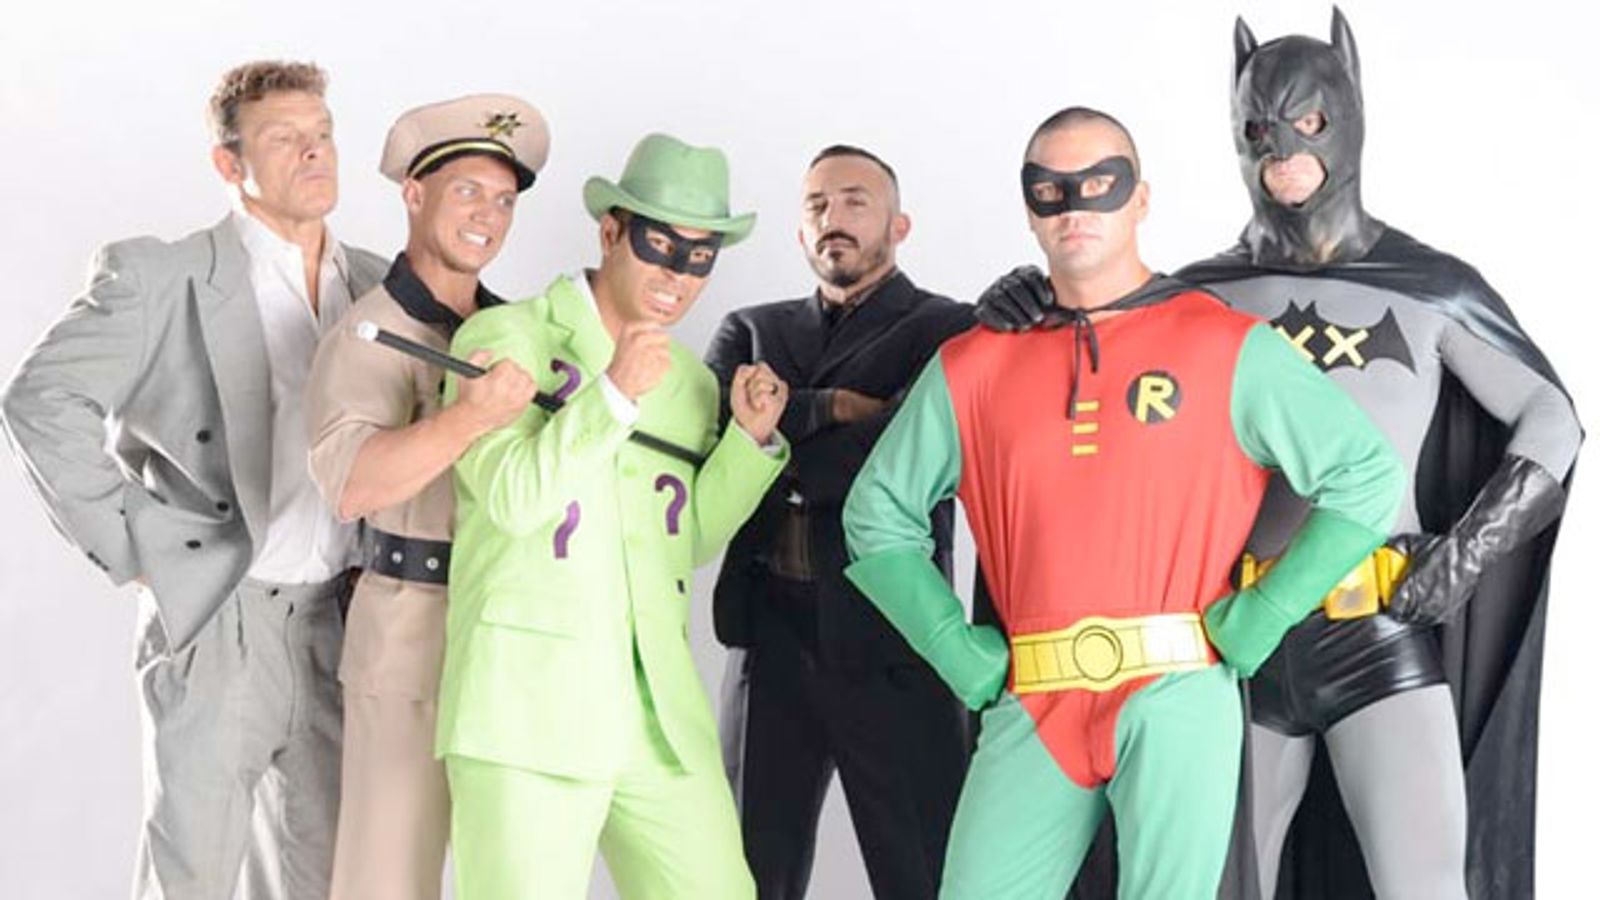 Manville Releases Gallery for ‘Batman And Robin: An All-Male XXX Parody’